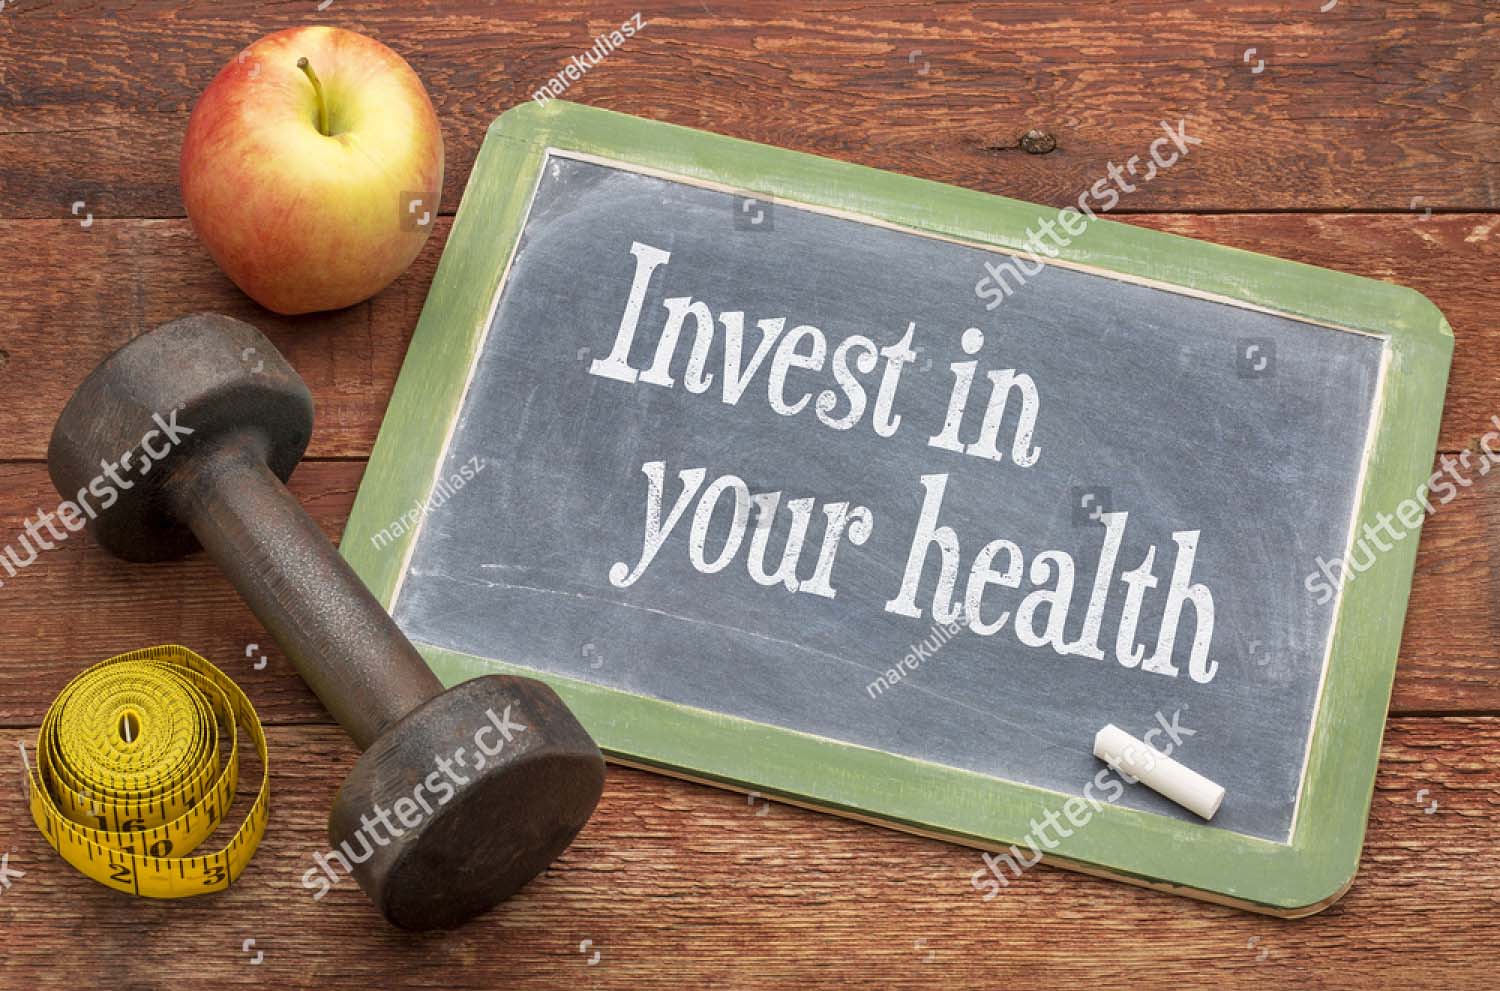 stock-photo-invest-in-your-health-slate-blackboard-sign-against-weathered-red-painted-barn-wood-with-a-289592738_test